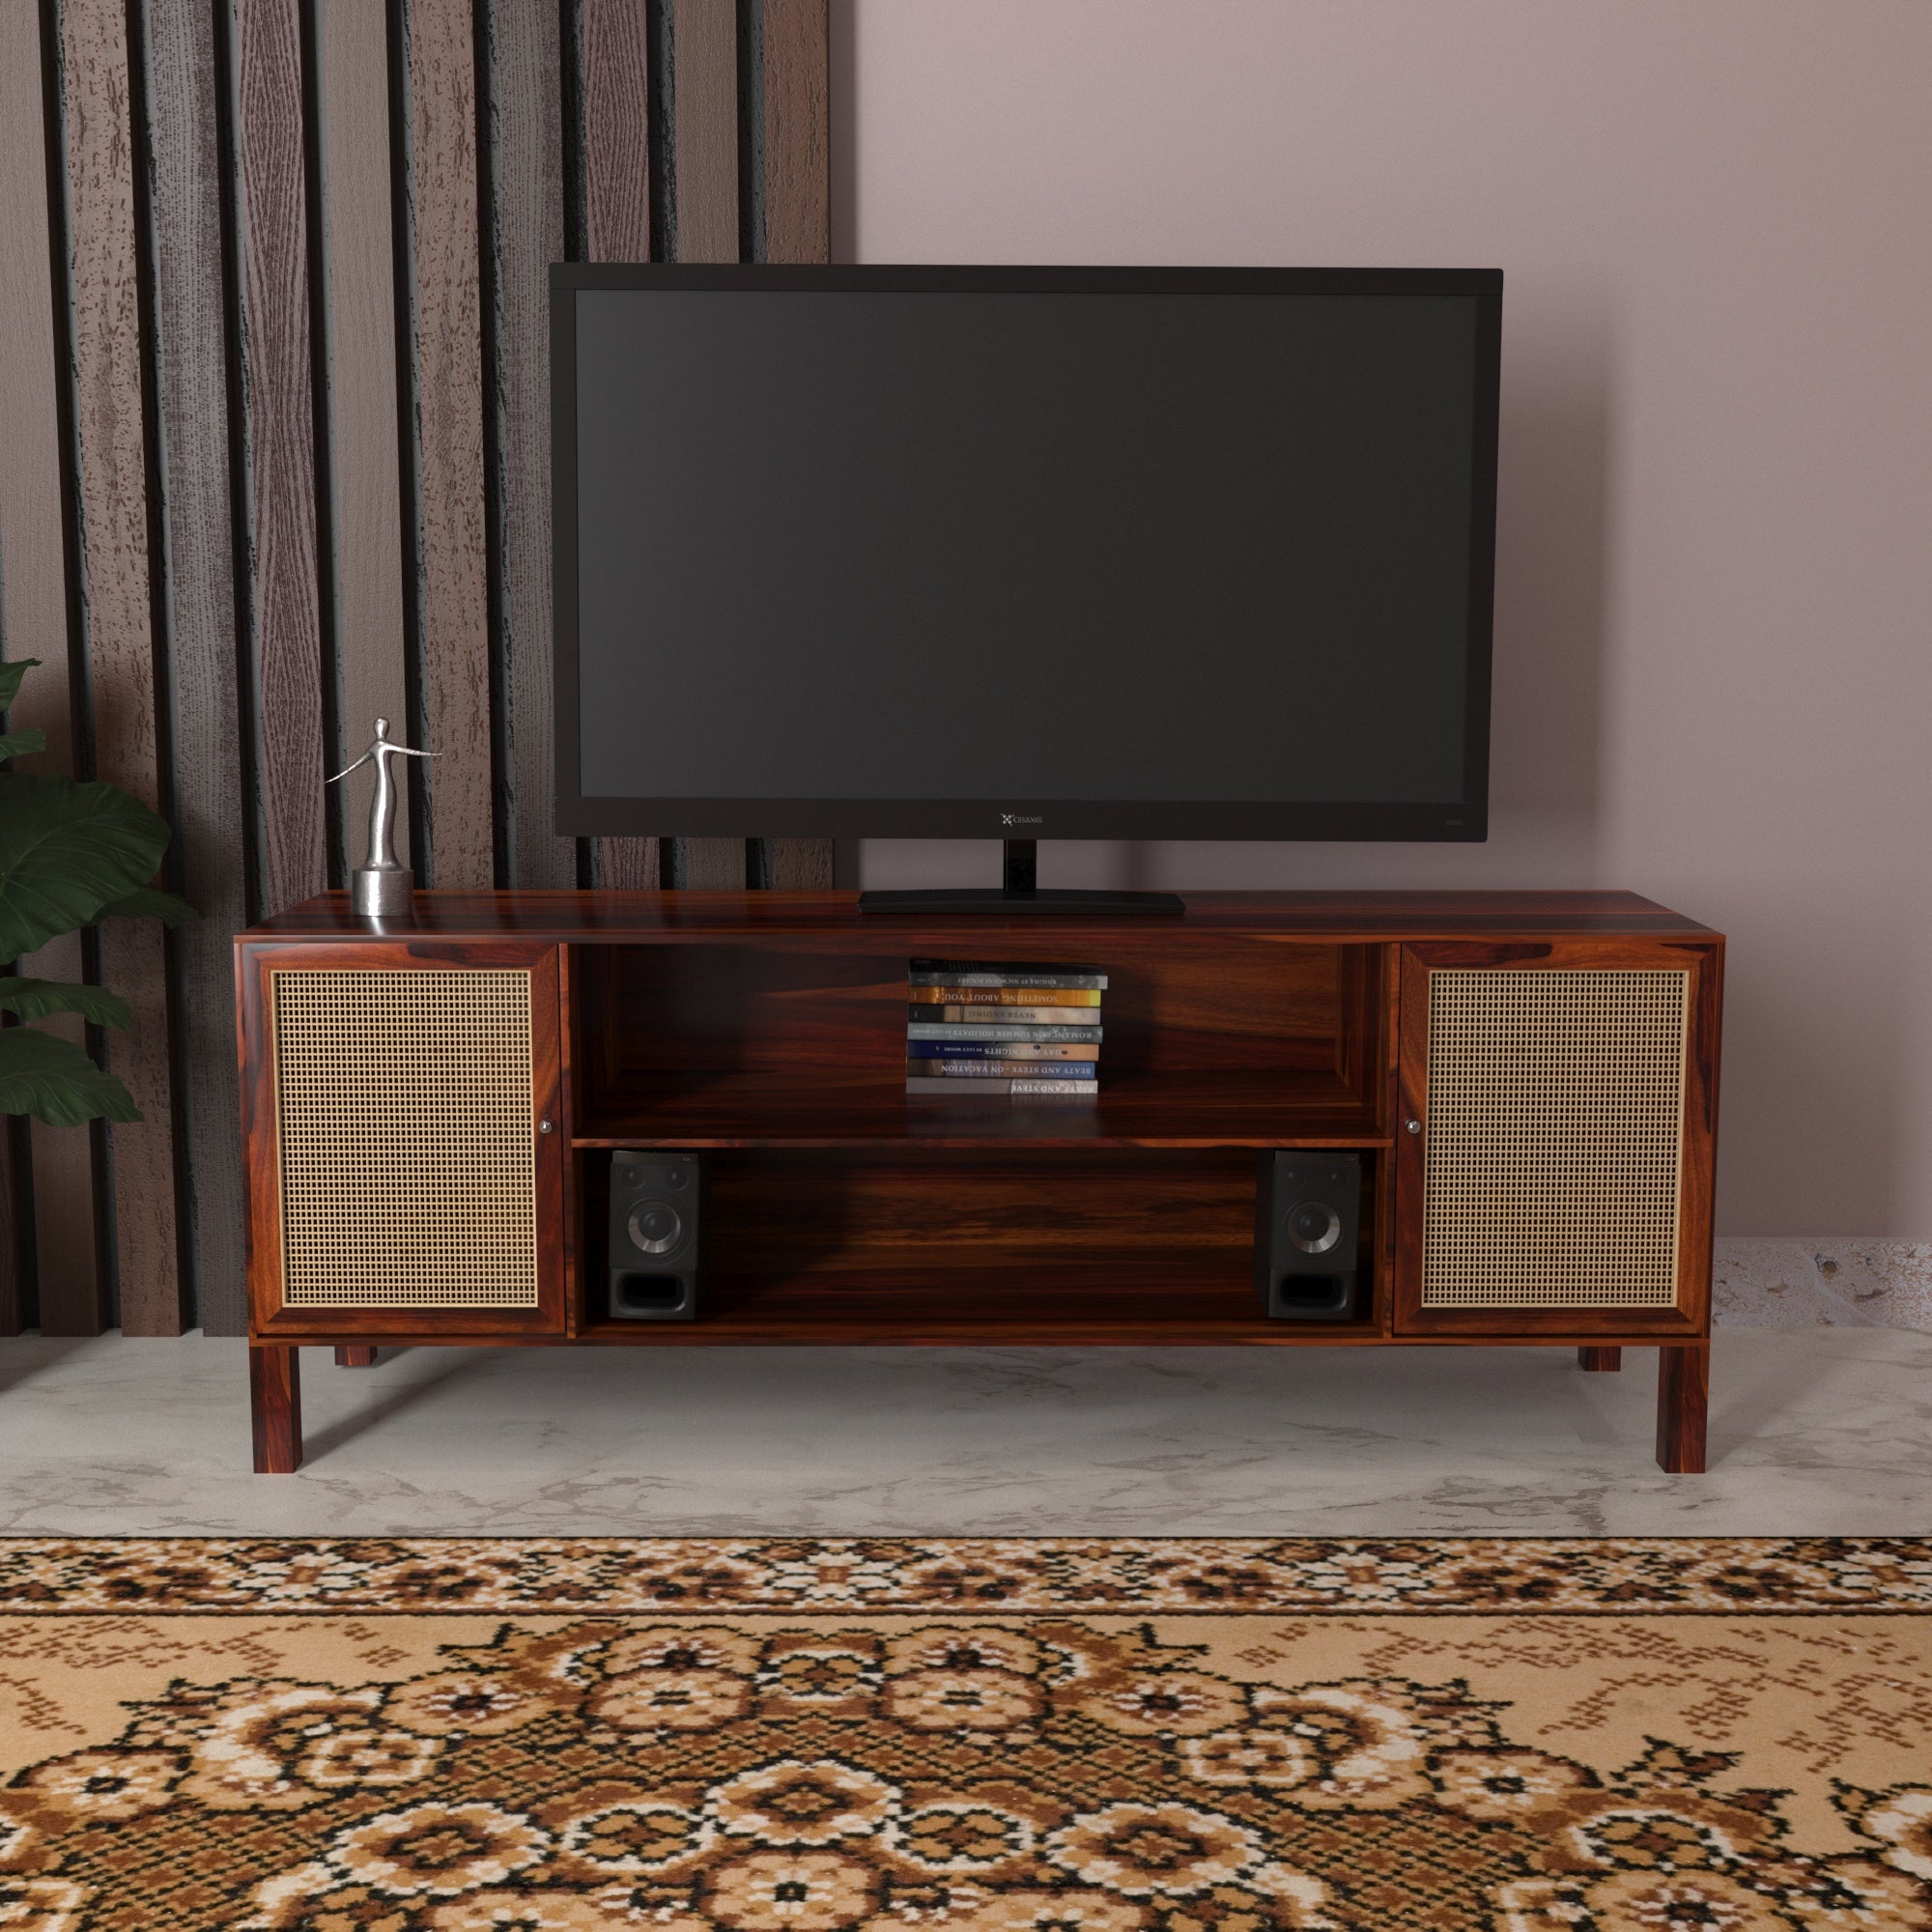 Premium Aesthetic Dark Handmade Wooden Cane TV Stand for Home Tv stand